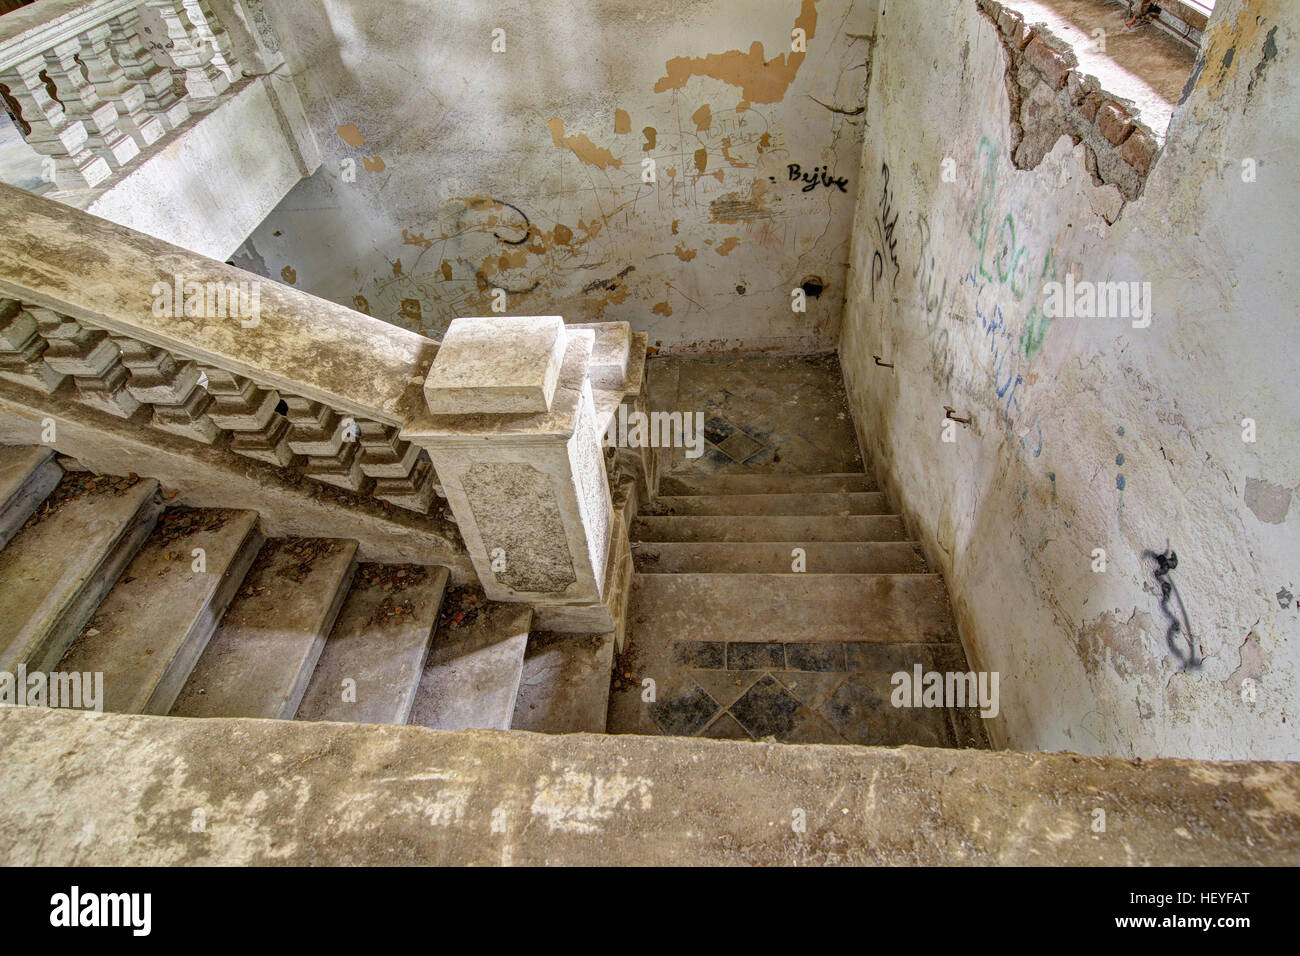 Detail of the staircase in the ruins of an ancient castle Stock Photo